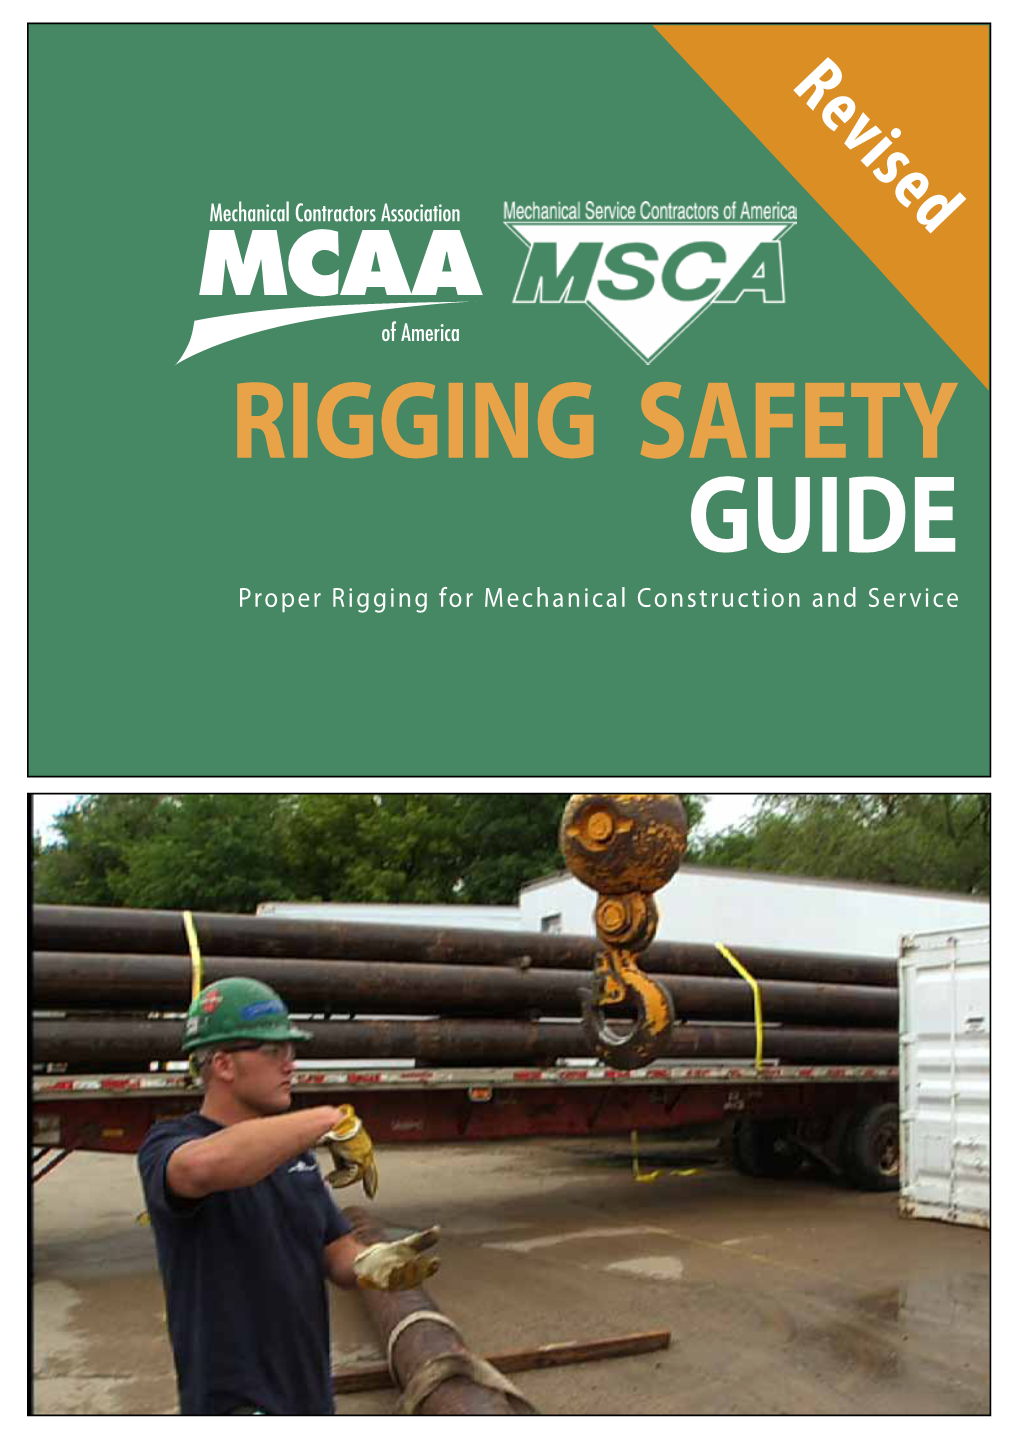 RIGGING SAFETY GUIDE Proper Rigging for Mechanical Construction and Service RIGGING SAFETY GUIDE